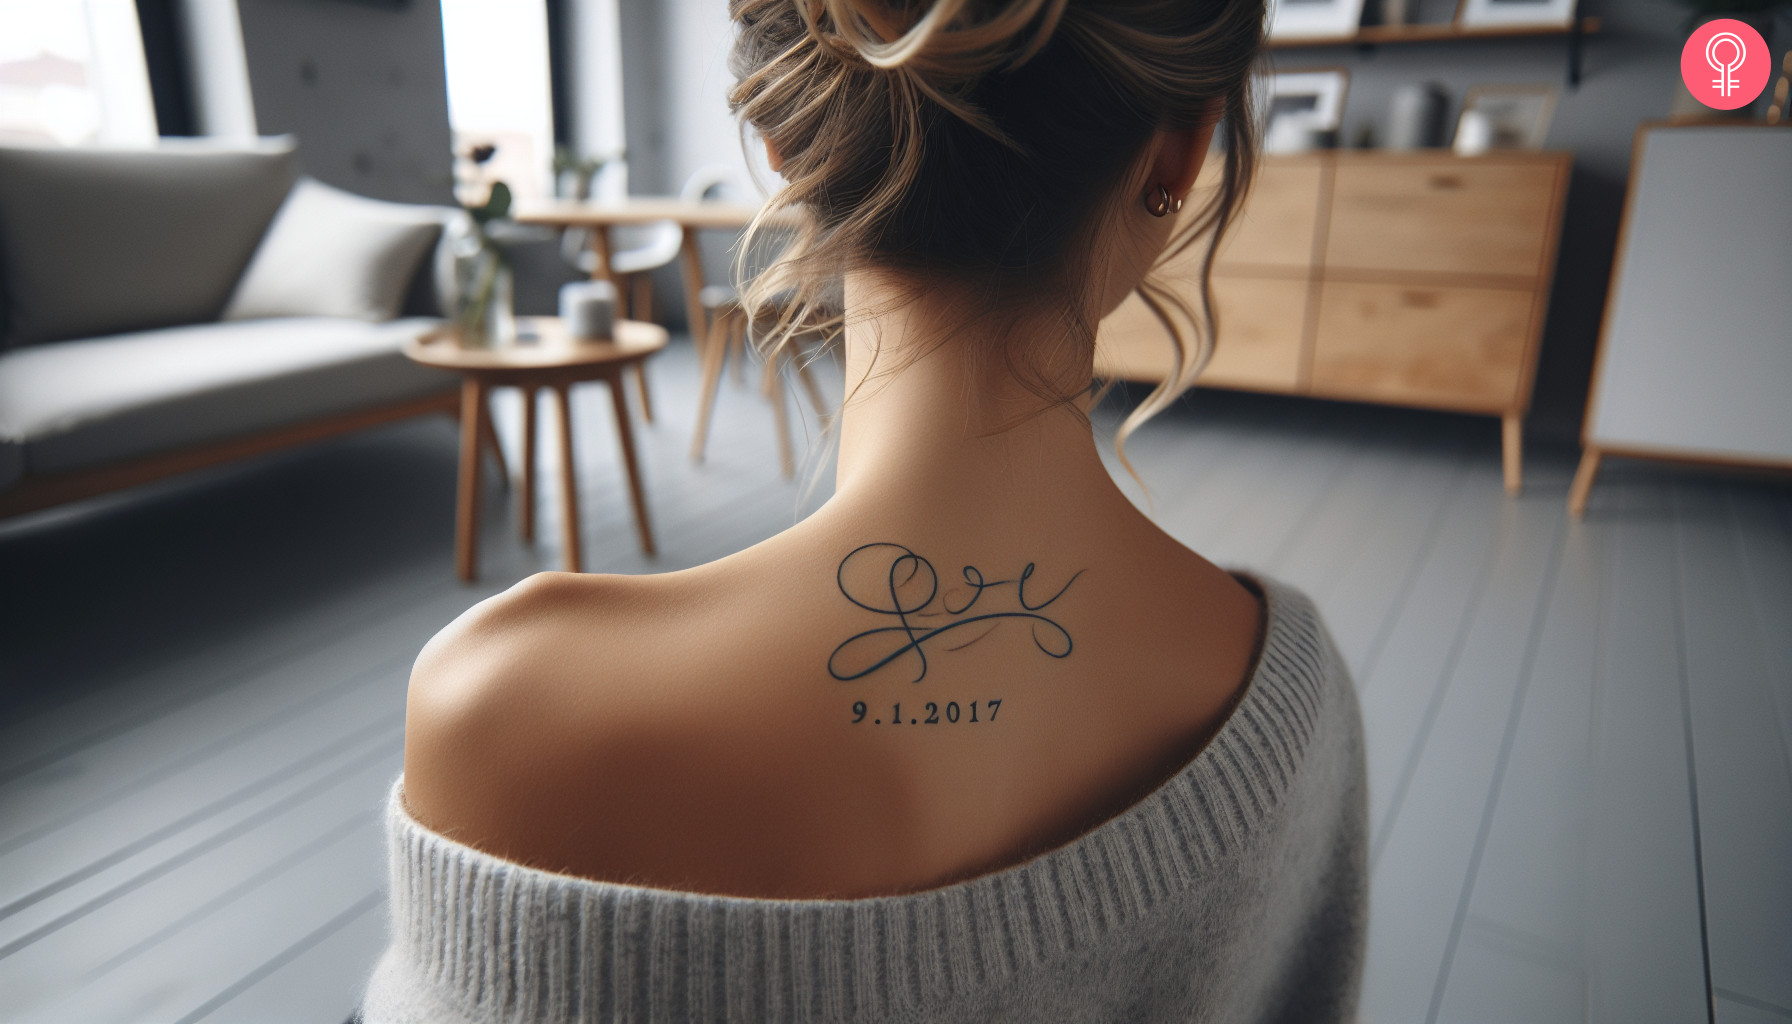 A sobriety date tattoo on the back